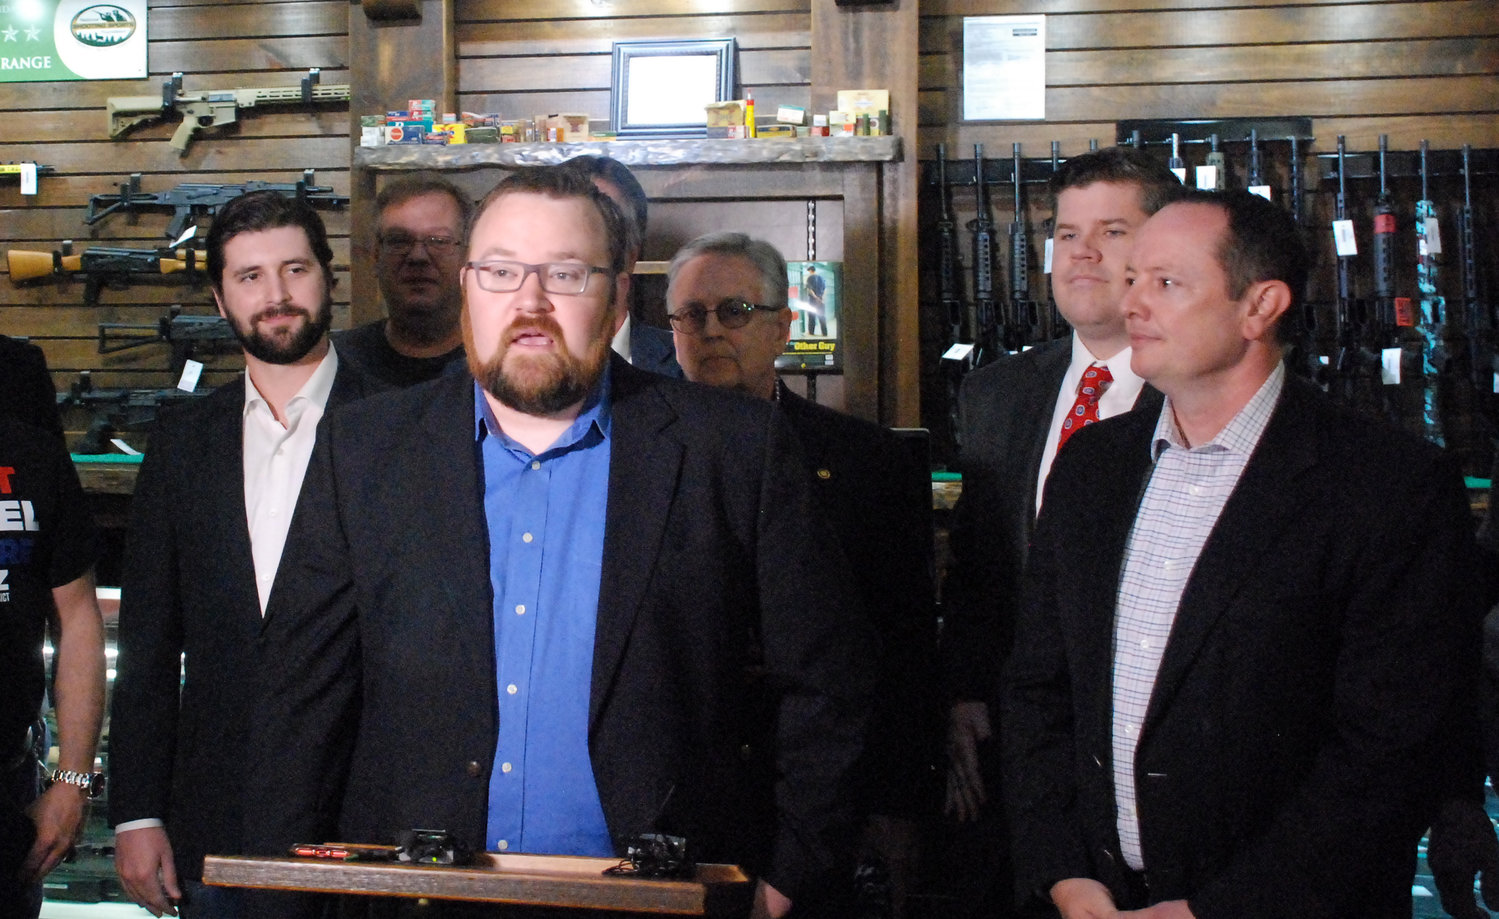 CHRISTIAN COUNTY LAWMAKERS played a key role in the passage of the Second Amendment Protection Act, or SAPA in the Missouri General Assembly in 2021. Pictured, from left, State Rep. Jered Taylor, R-Republic and State Sen. Eric Burlison, R-Battlefield, surrounded by other state lawmakers and SAPA supporters at a press conference at Sound of Freedom USA indoor gun range in Ozark on May 17, 2021.